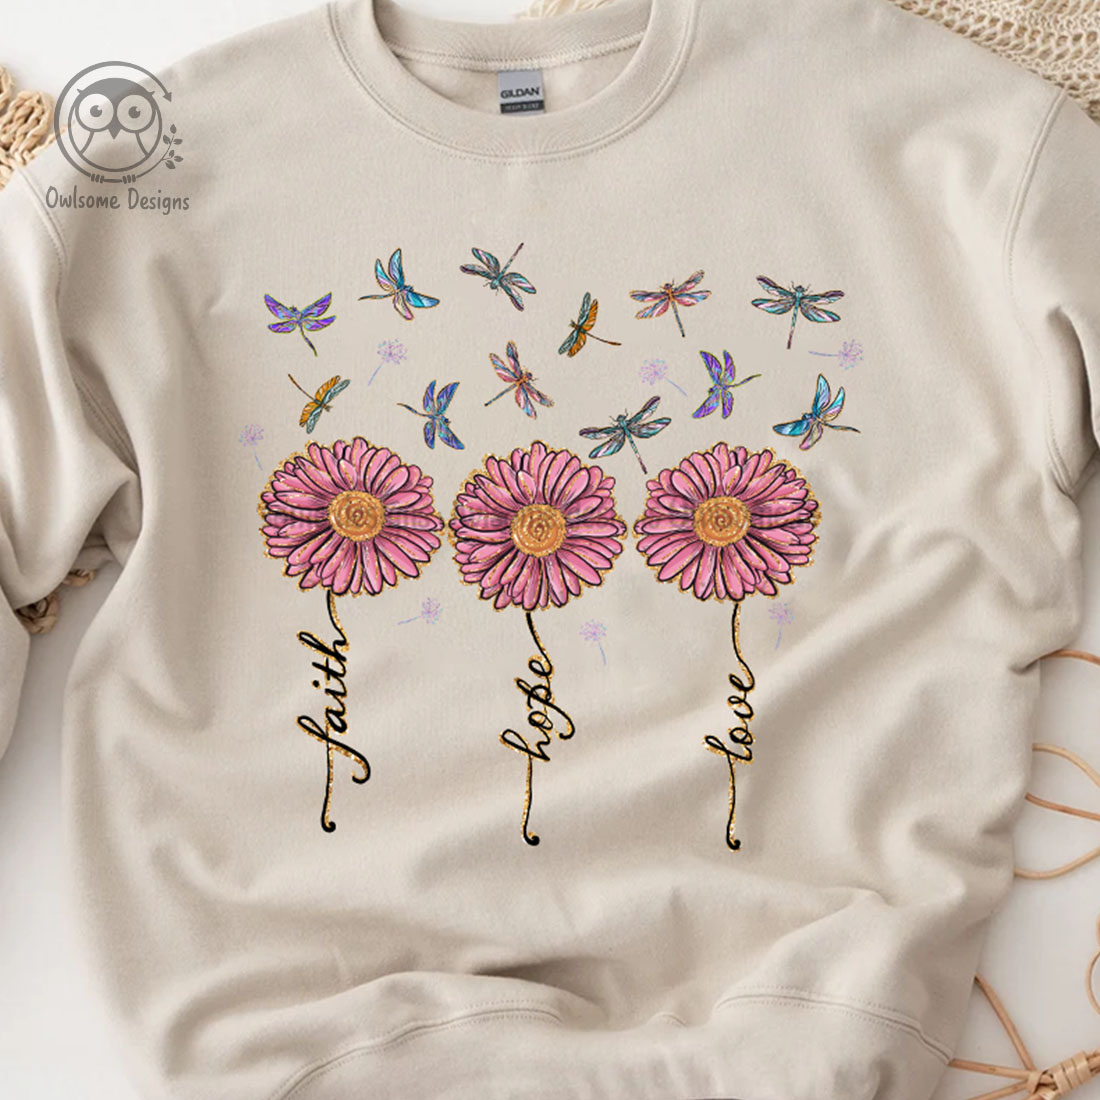 Image of sweatshirt with enchanting dragonfly print and flowers.